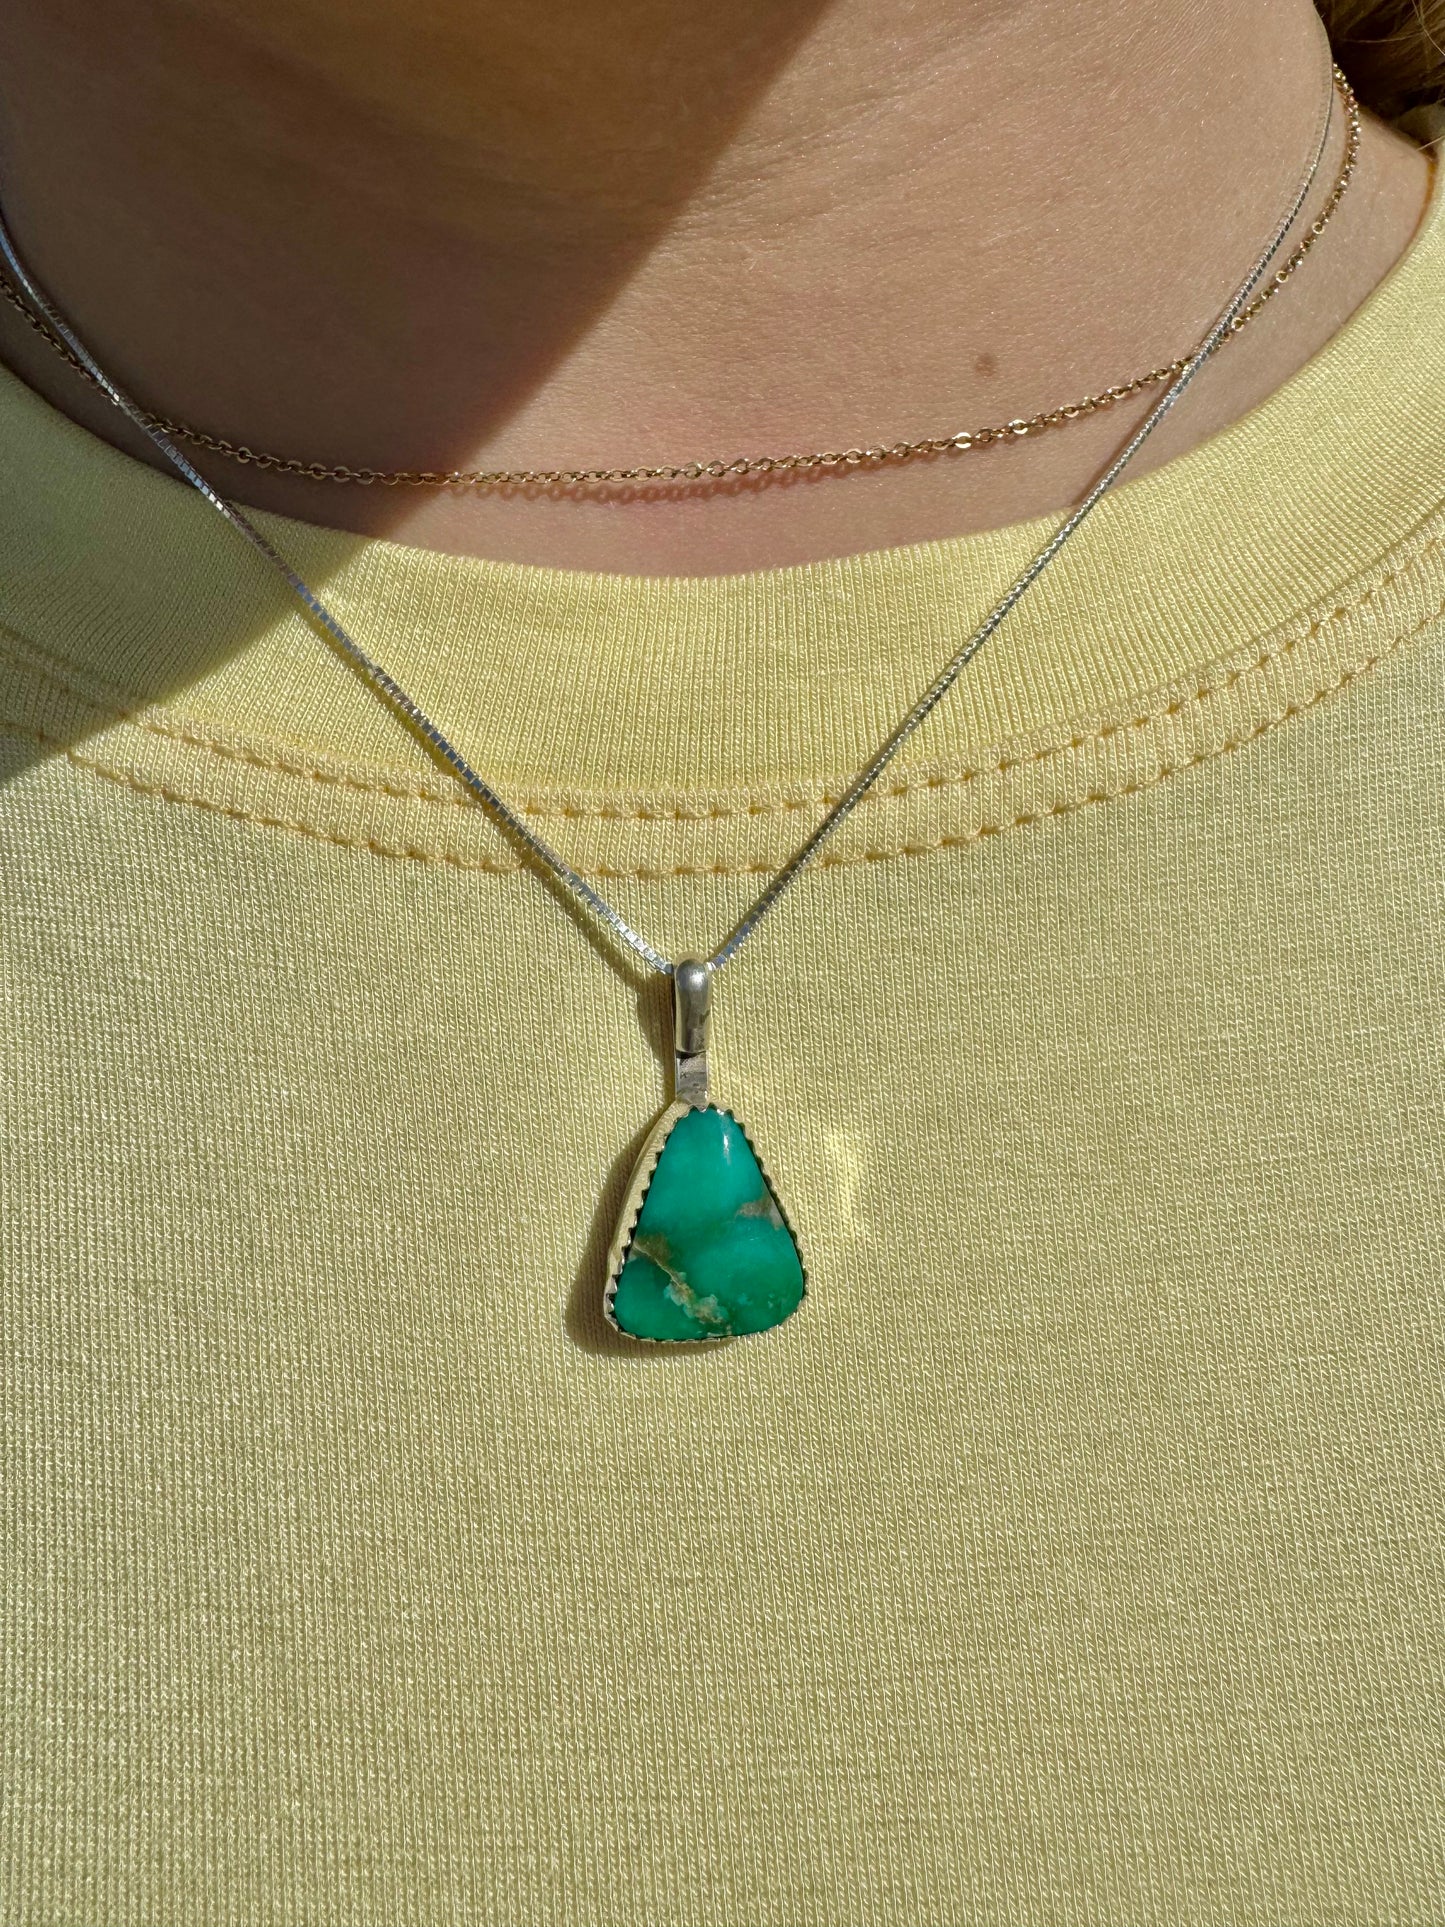 Green Turquoise Small Pendant Necklace